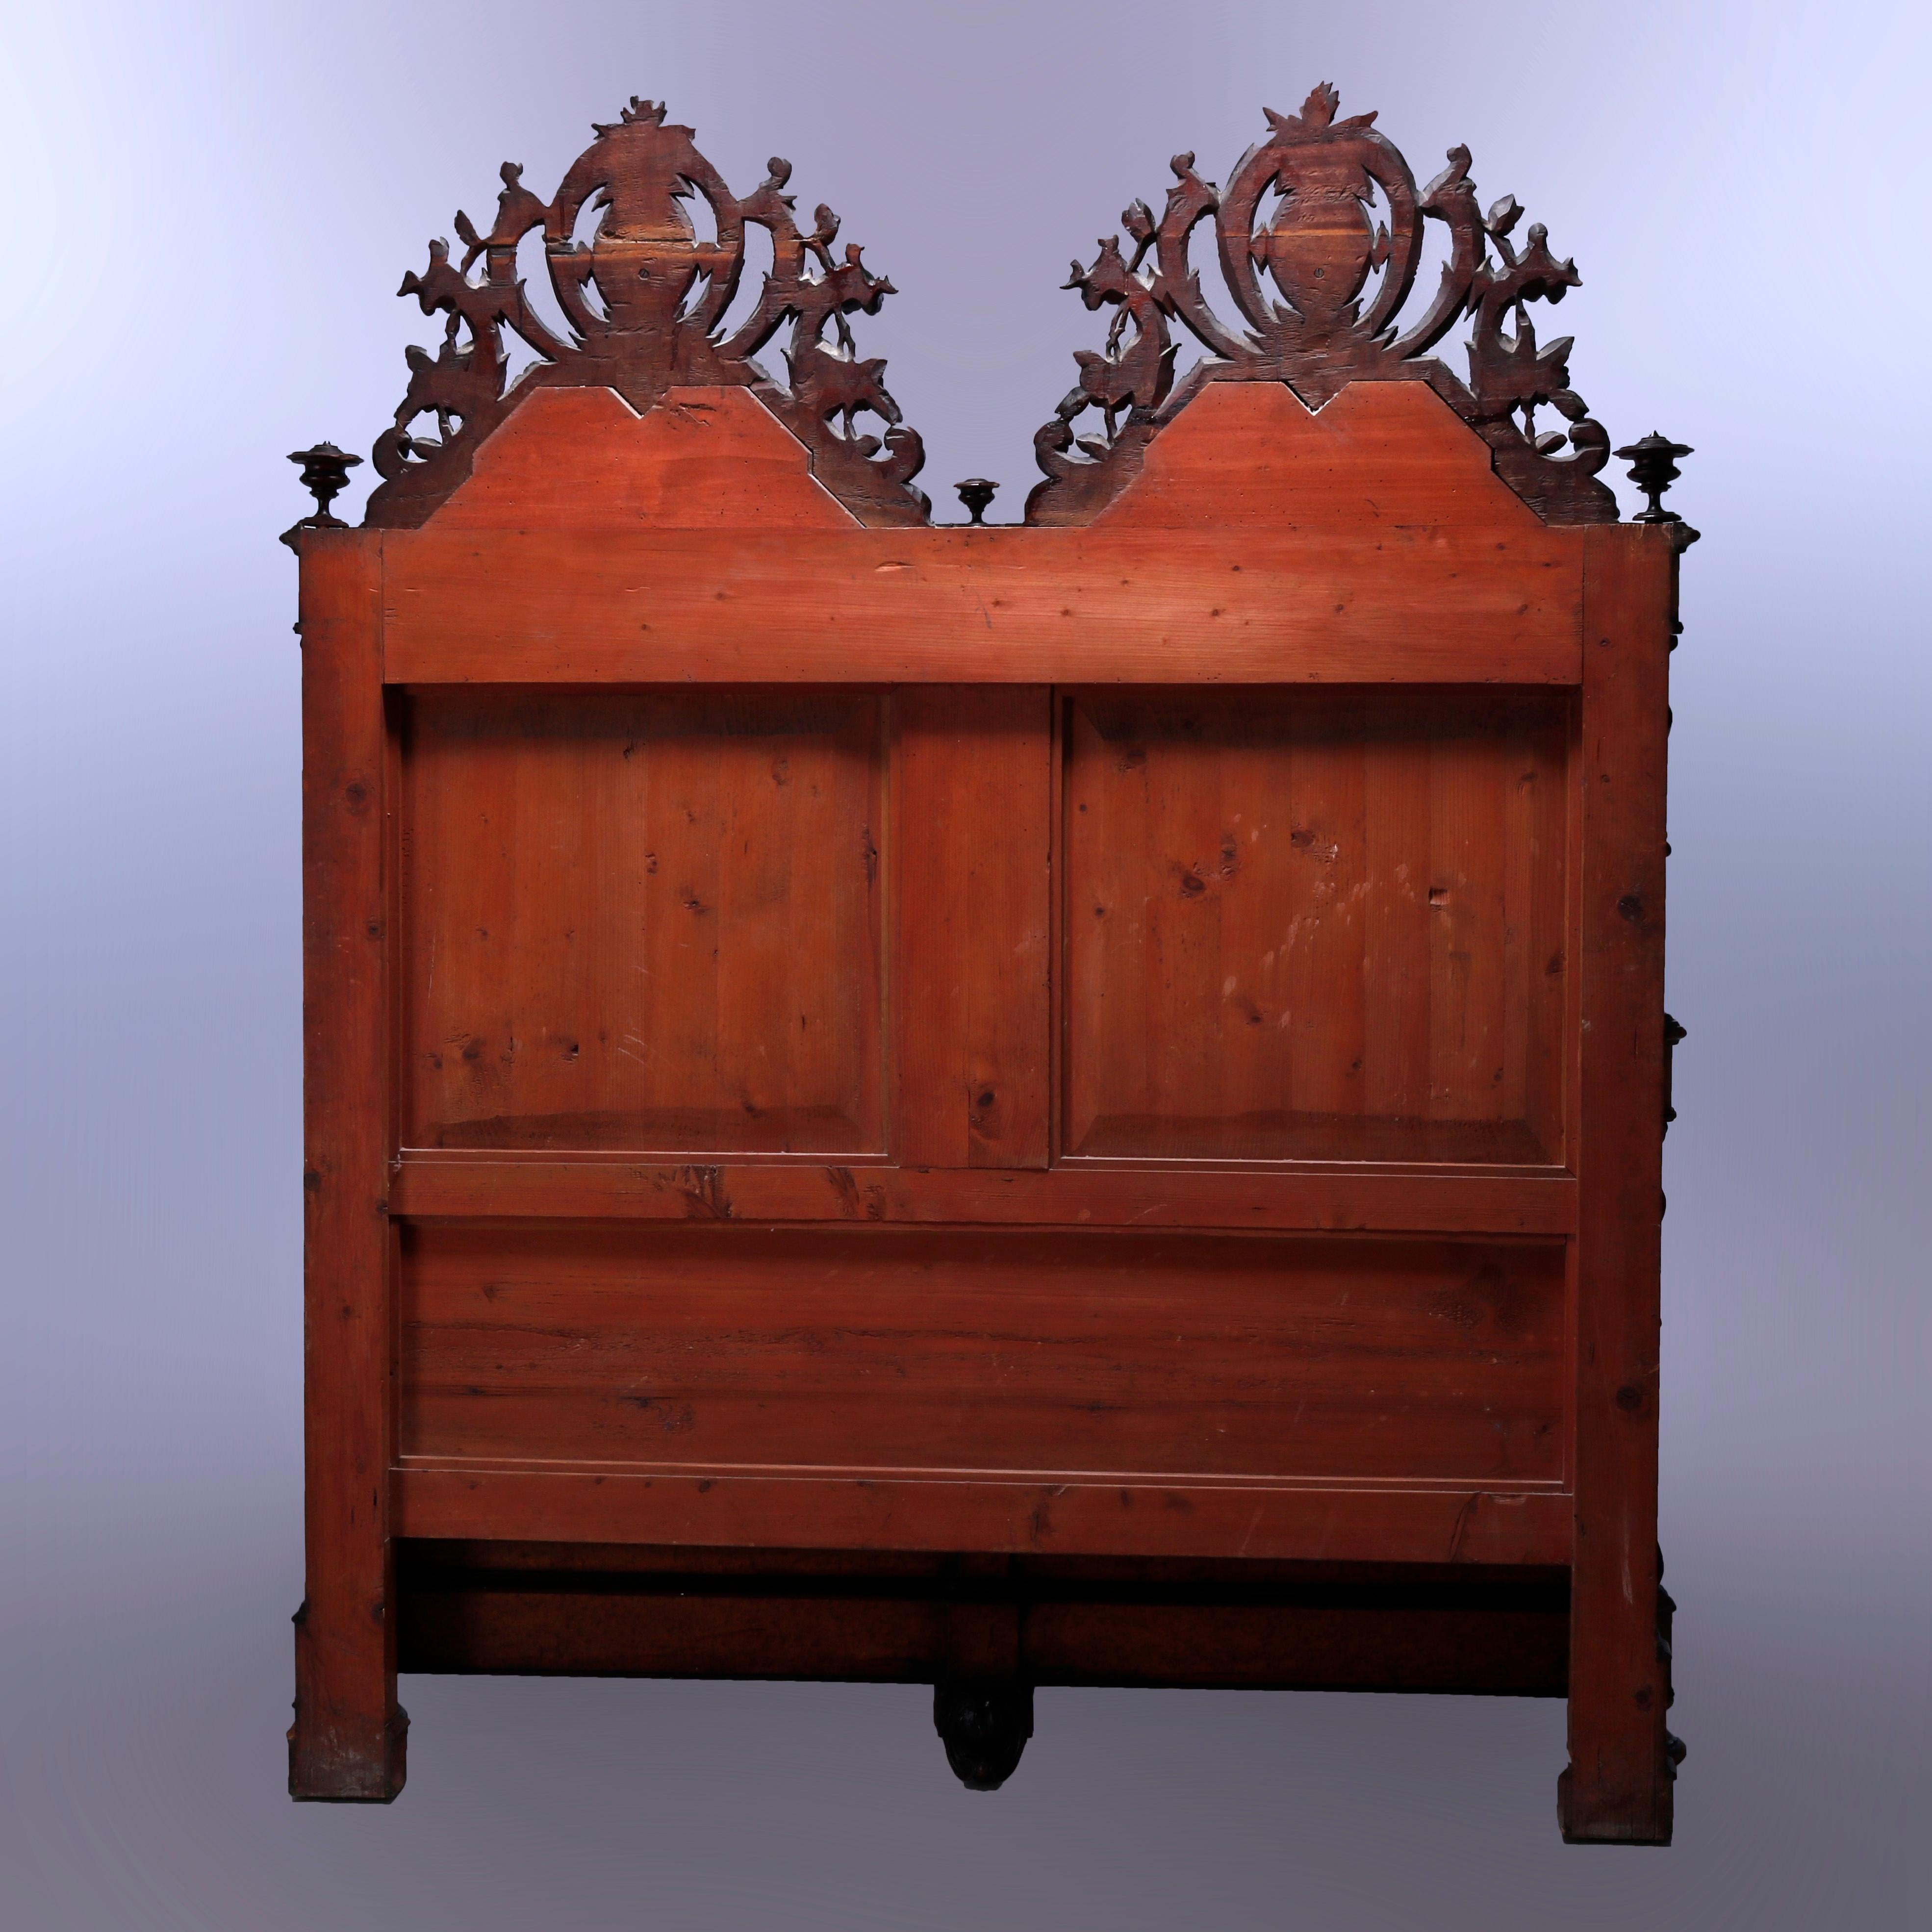 19th Century Antique Rococo Revival Birdseye Maple & Figural Carved Walnut Full Size Bed 1860